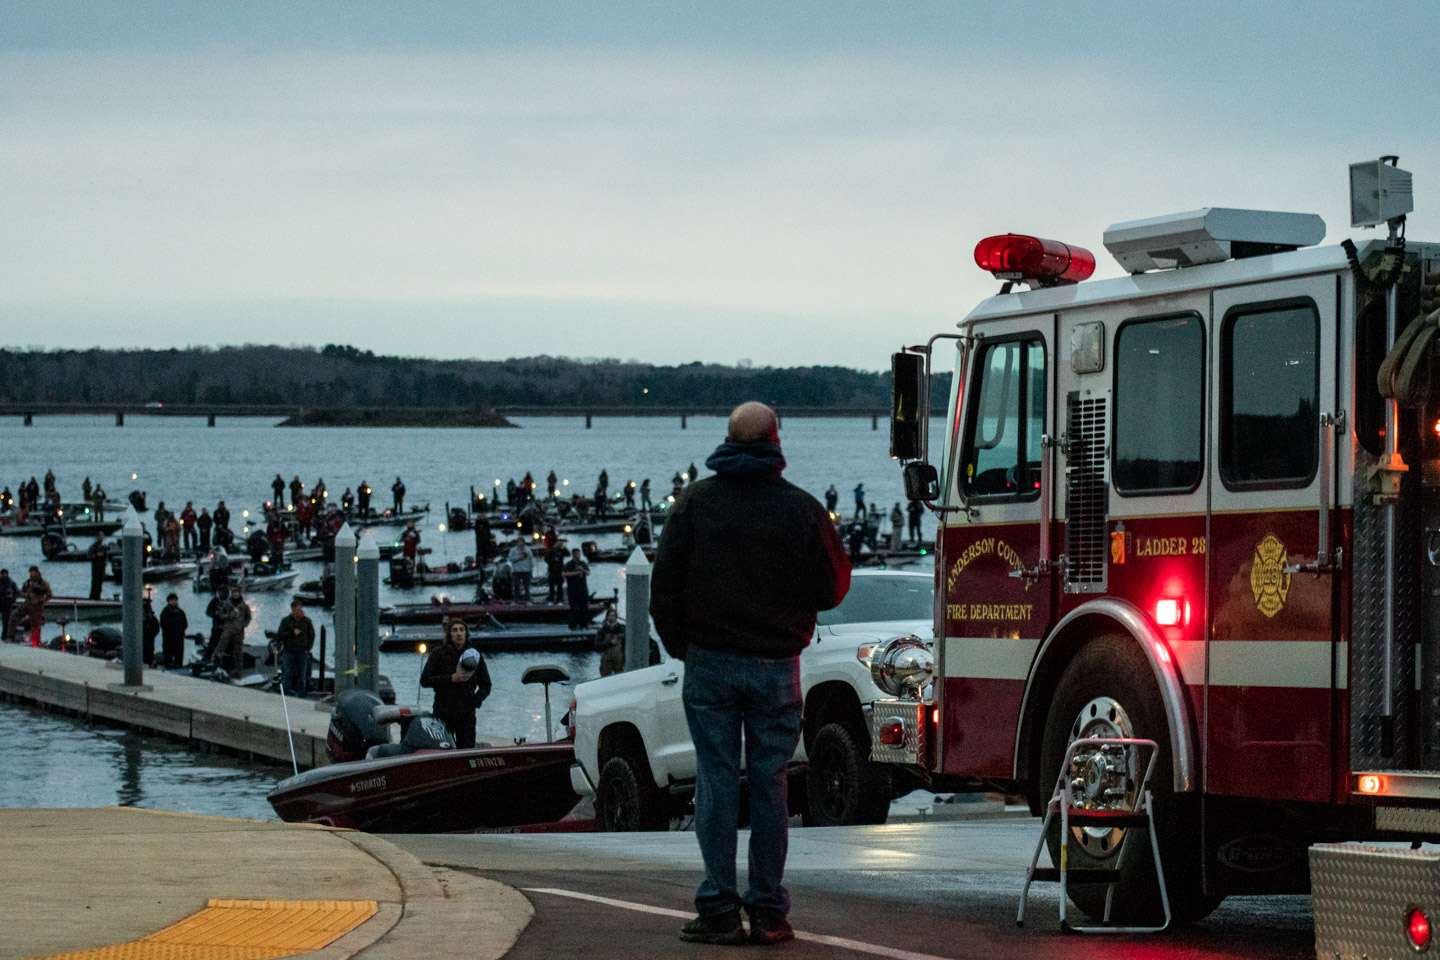 See the college anglers head out and get to work on the final day of the 2021 Carhartt Bassmaster College Series at Lake Hartwell presented by Bass Pro Shops!